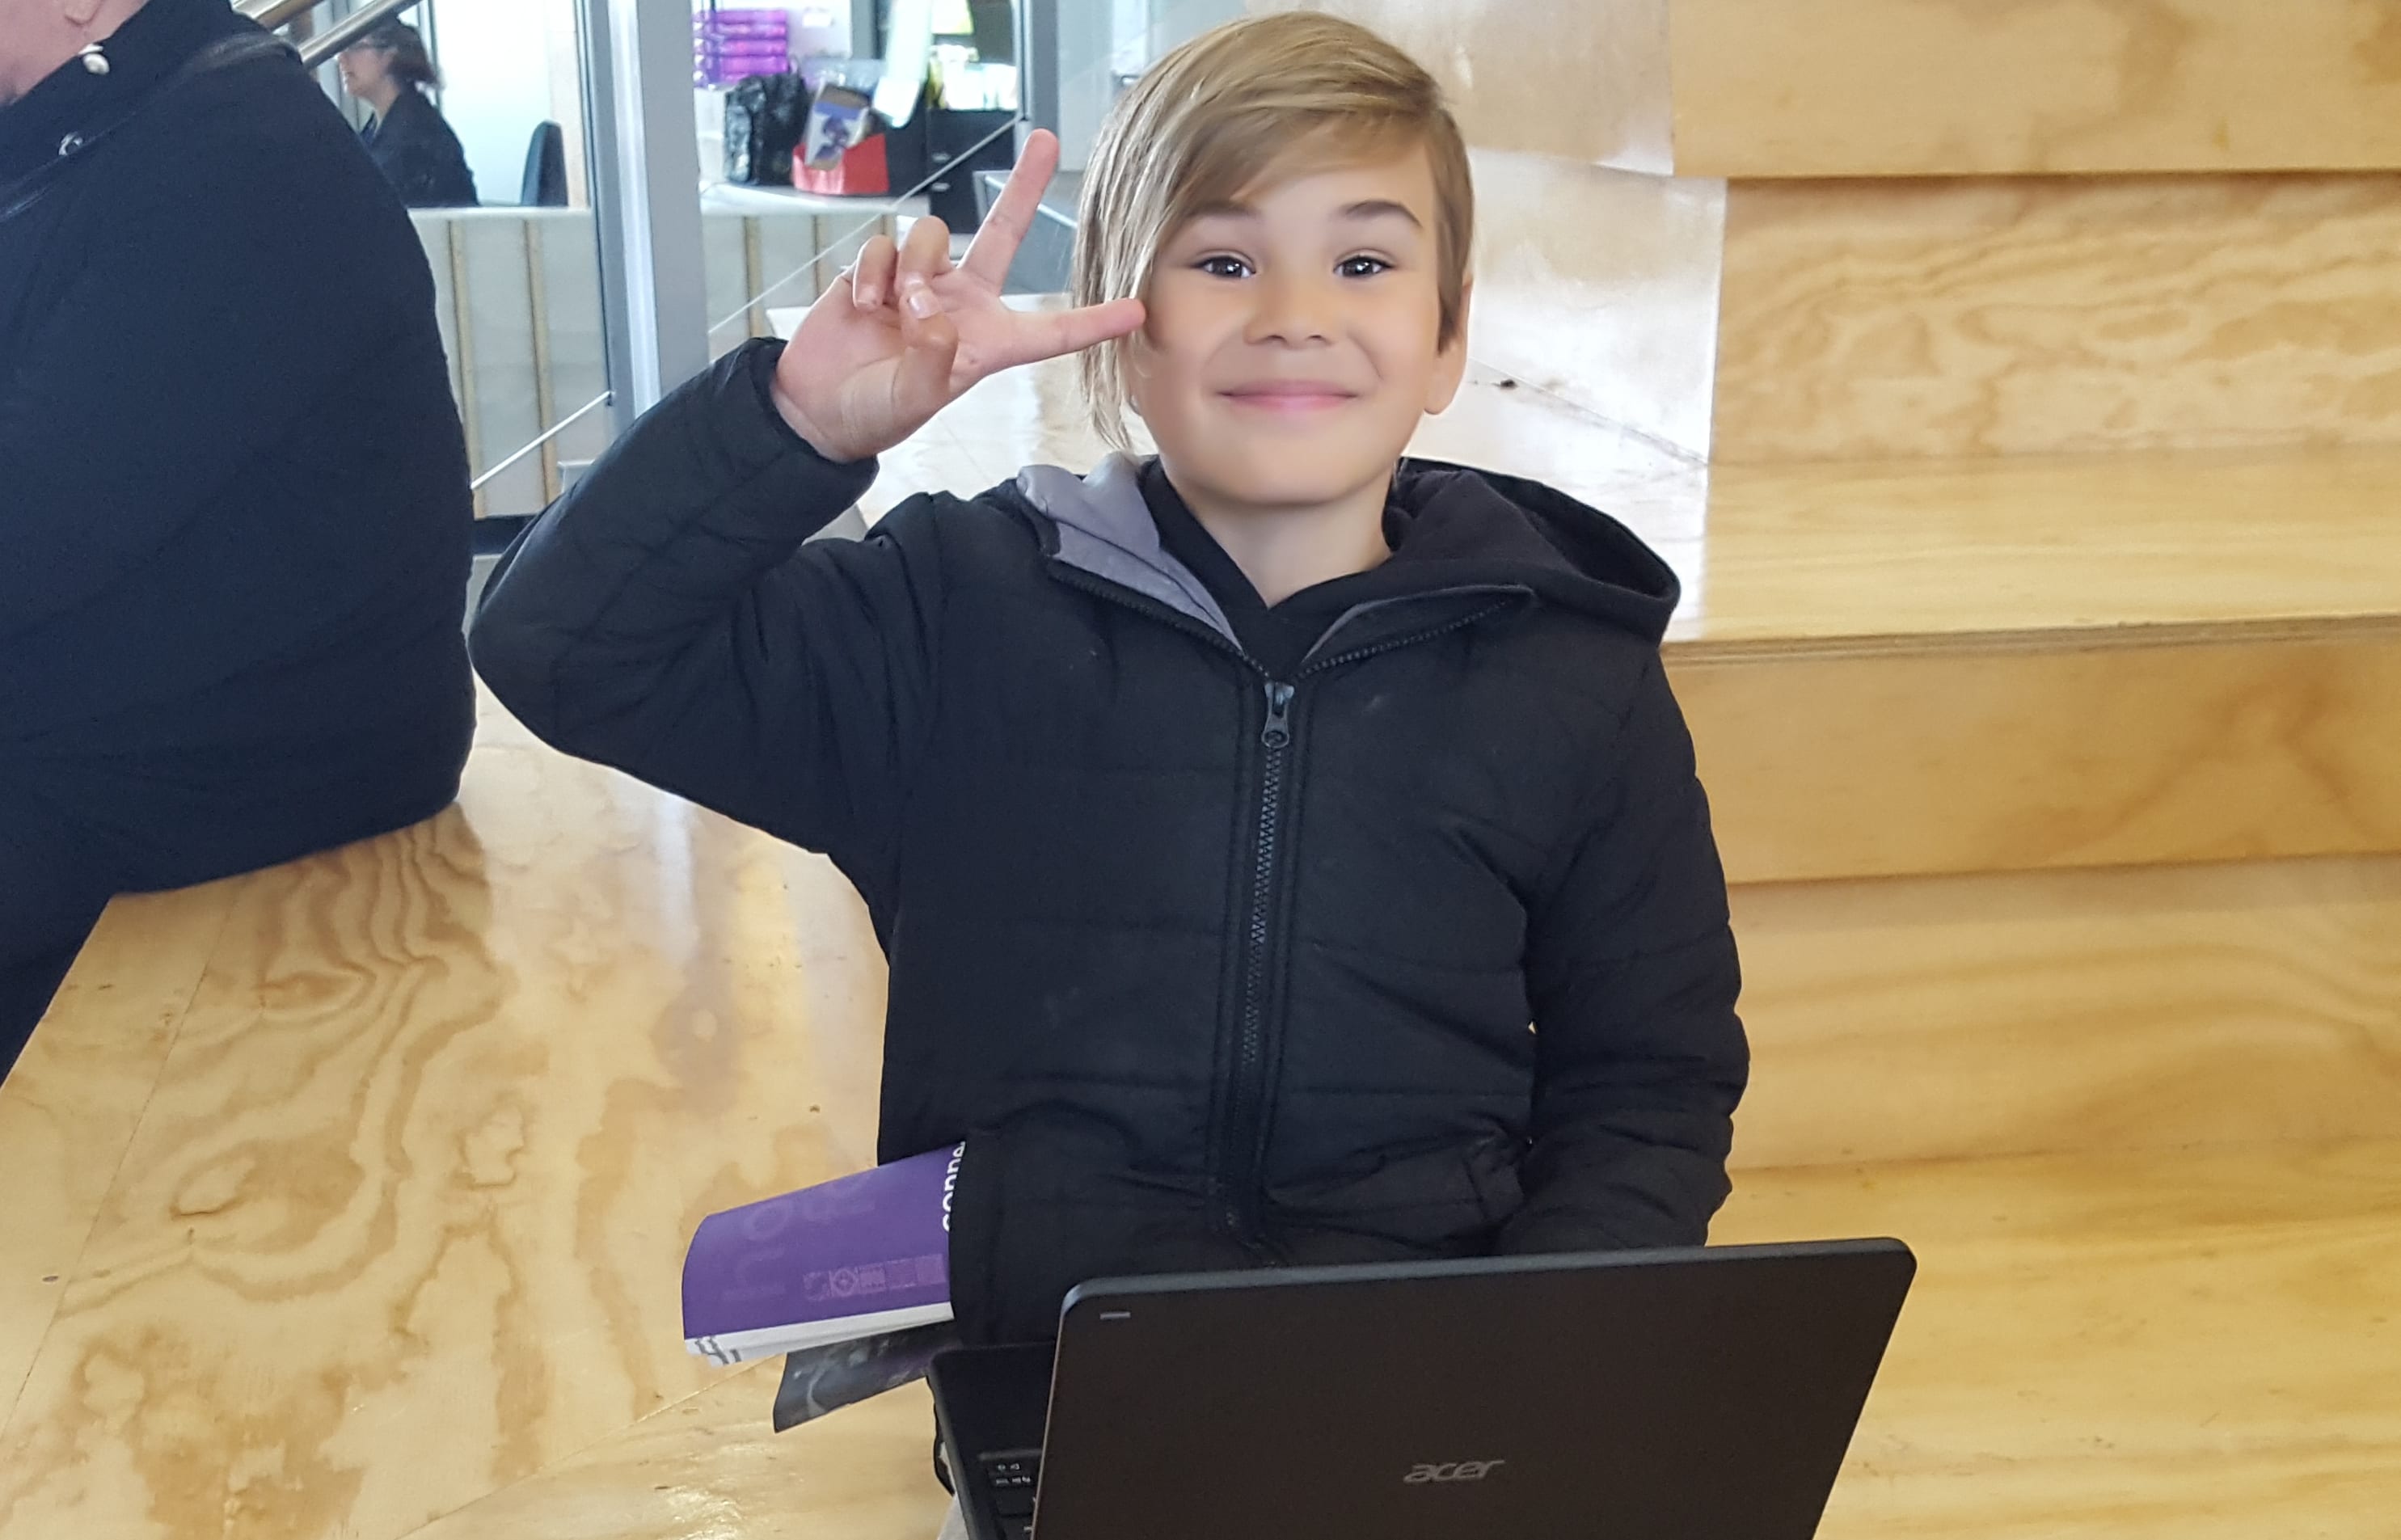 Seven-year-old Joseph Lawrence is one of the Haeata Community Campus students looking forward to accessing the internet at home under the new scheme.